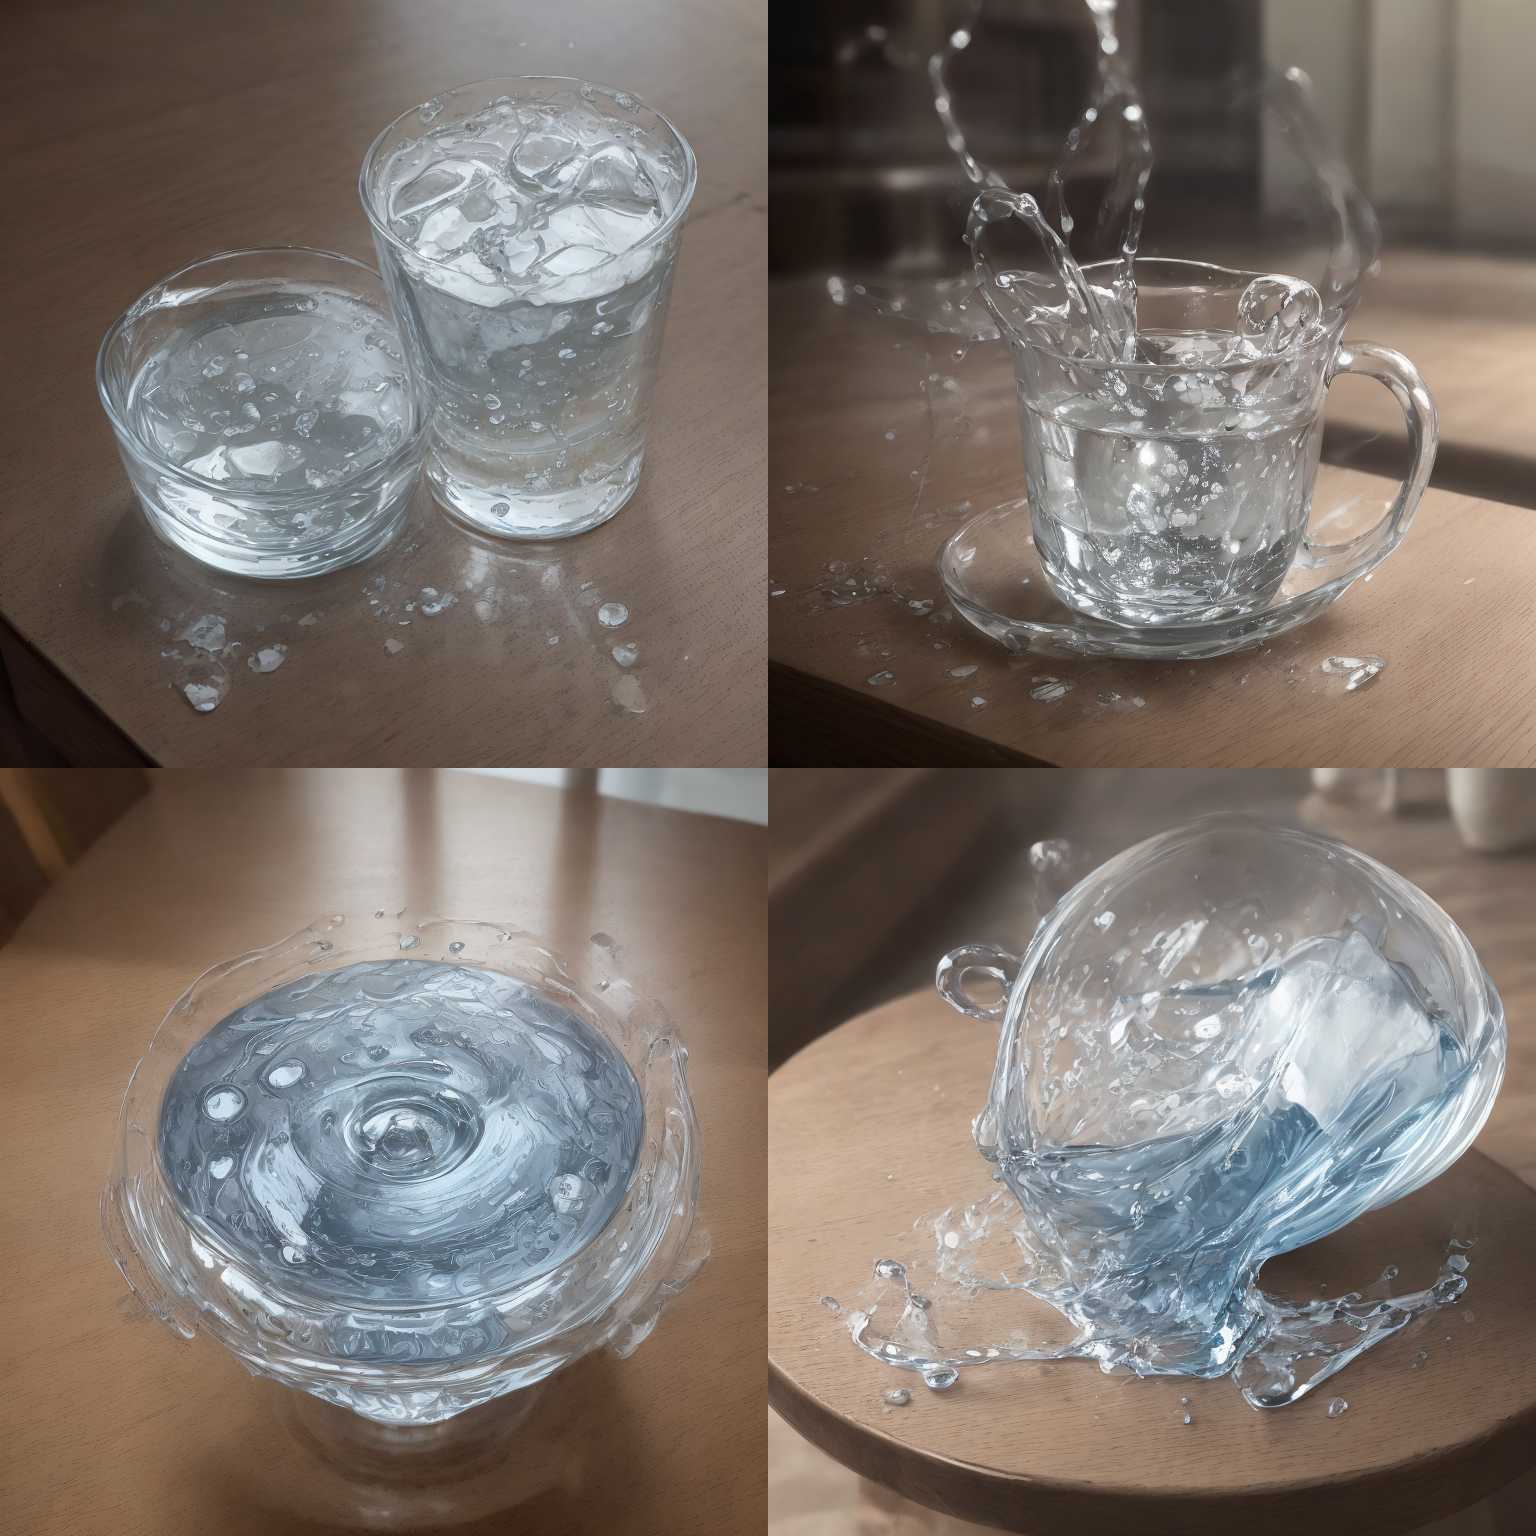 A full cup of water tipped over on a table